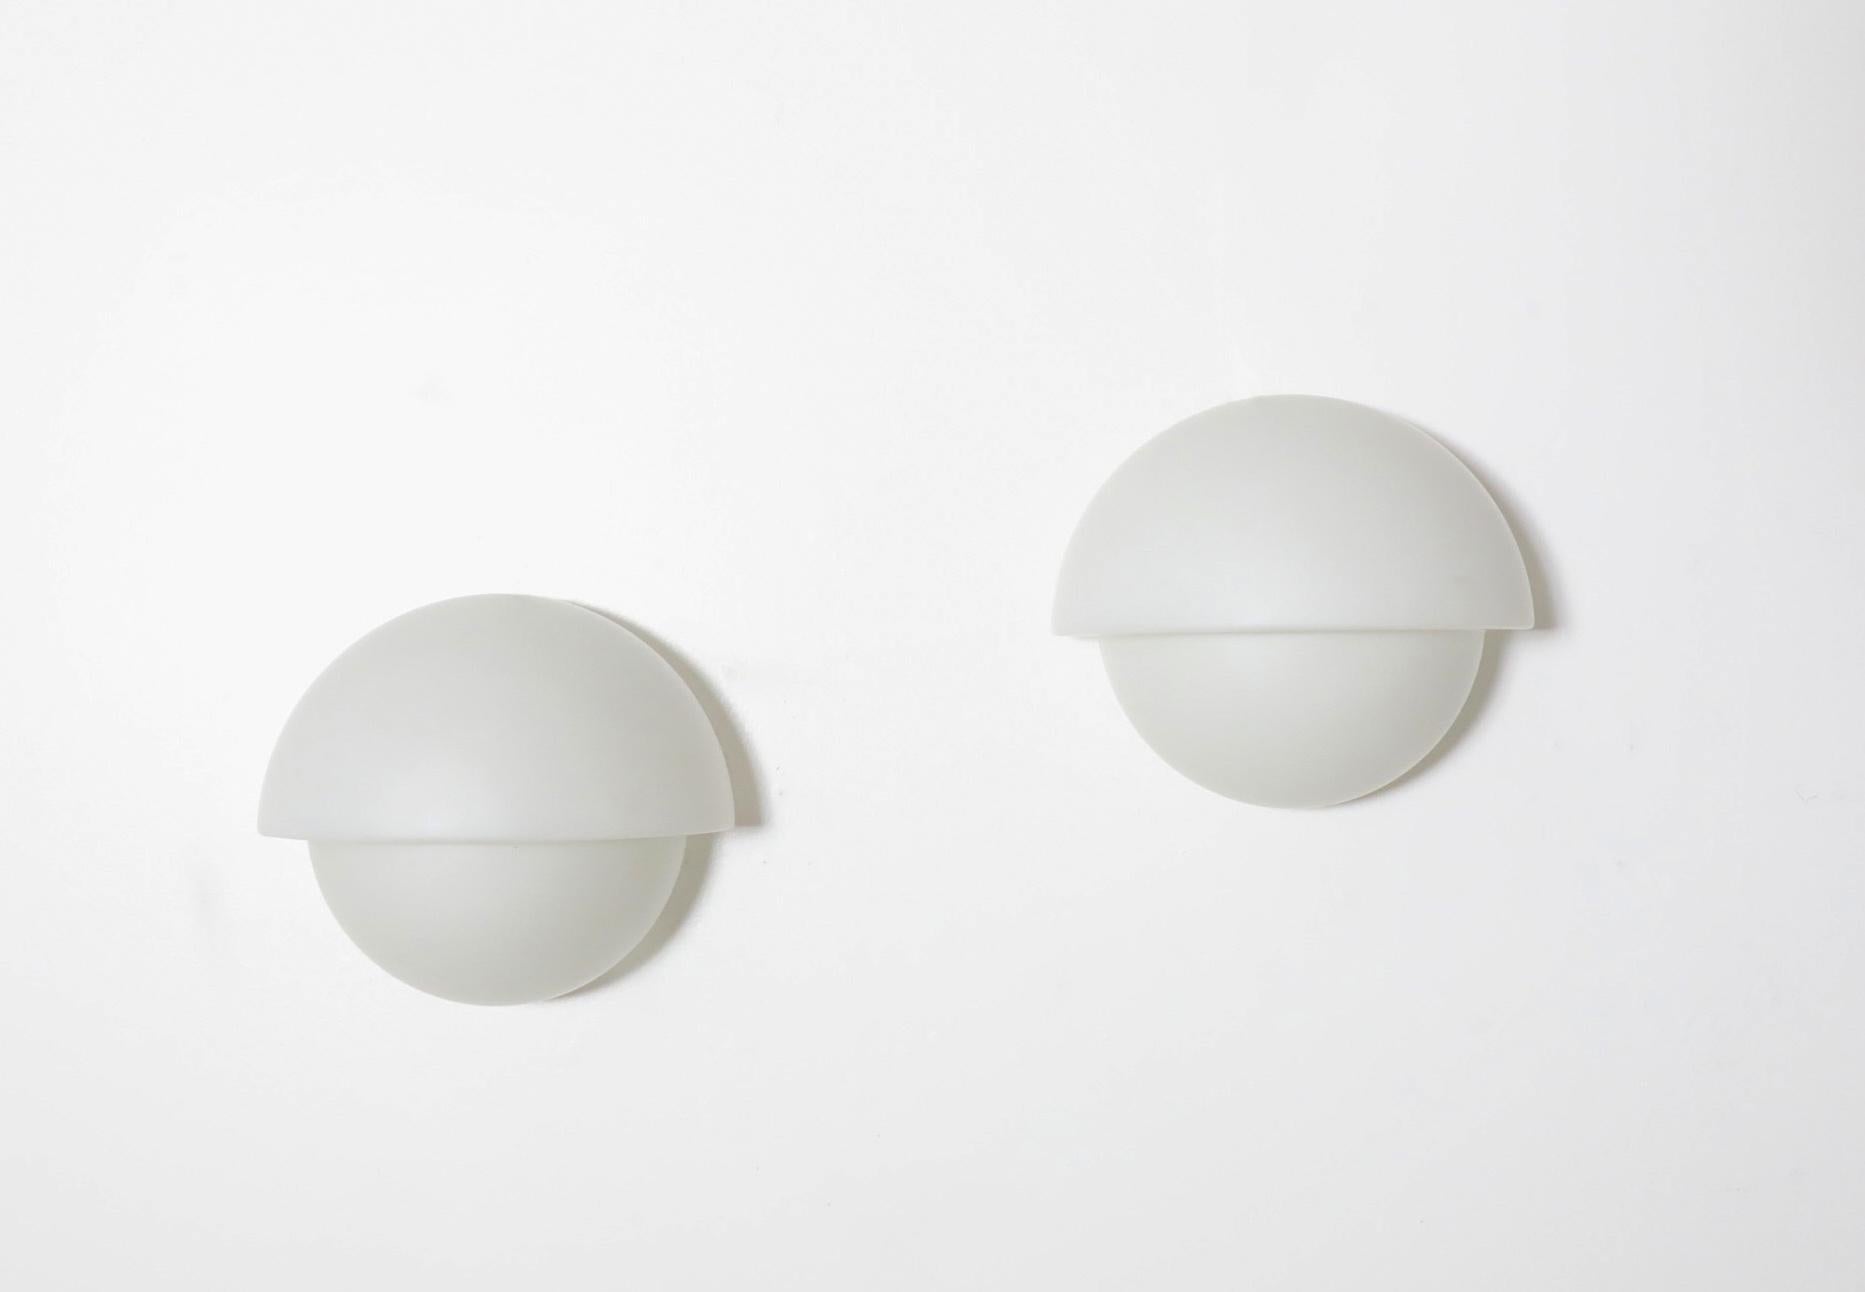 Mid-Century., 1960's architectural milk glass wall mounted sconces by Sergio Asti. Sergio Asti, born in Milan in 1926, opened his own office in 1953. His diverse portfolio includes designs for architecture, furniture, lighting, and glass. In 1957,